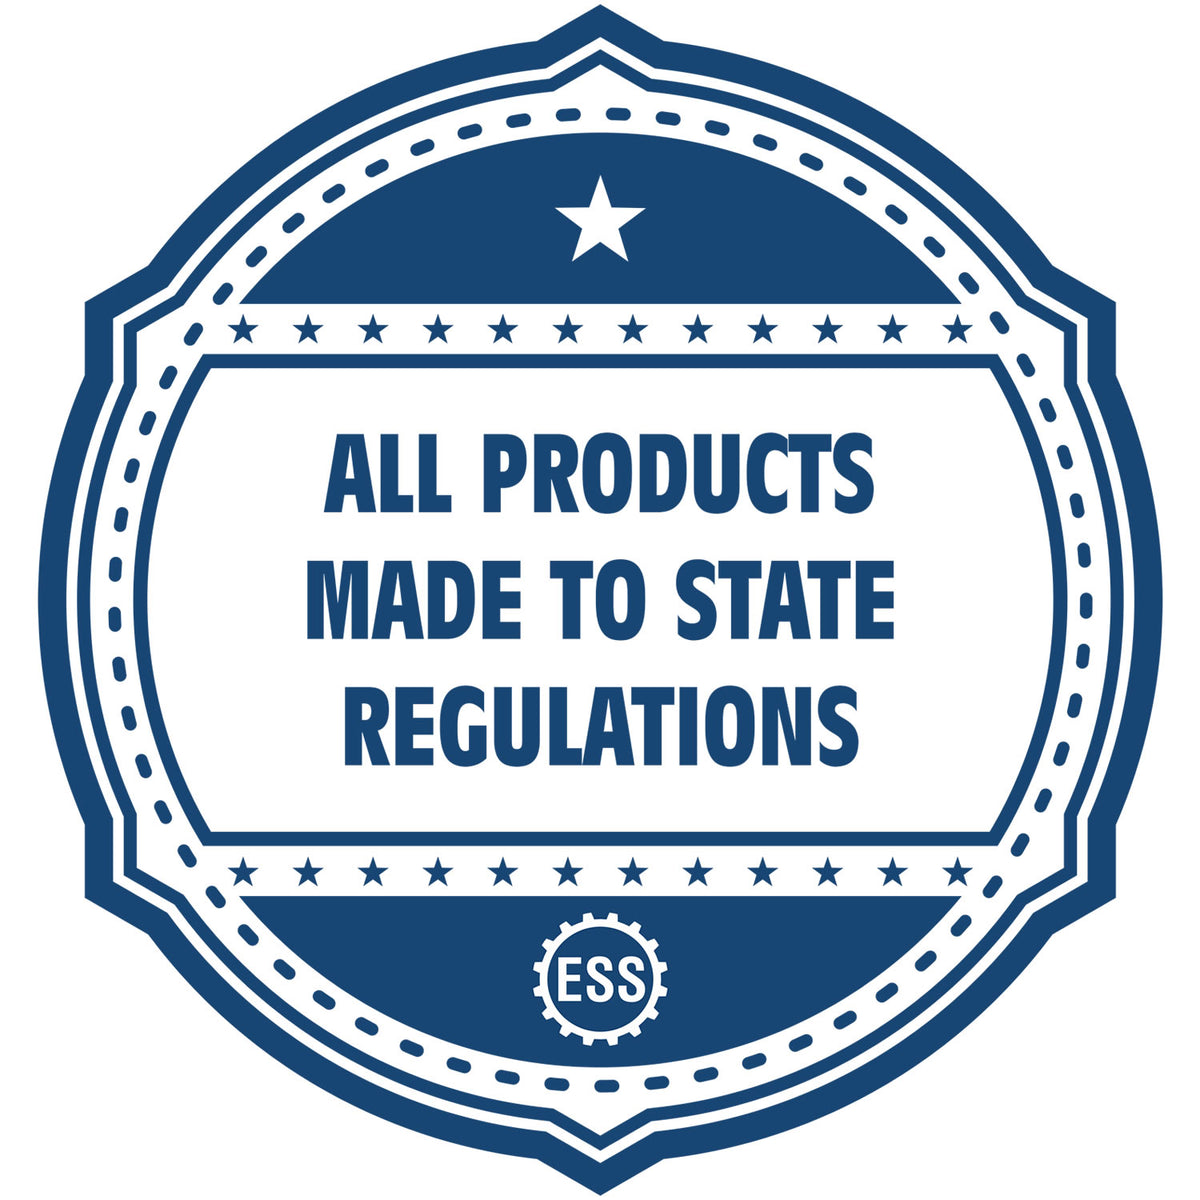 An icon or badge element for the Pennsylvania Professional Engineer Seal Stamp showing that this product is made in compliance with state regulations.